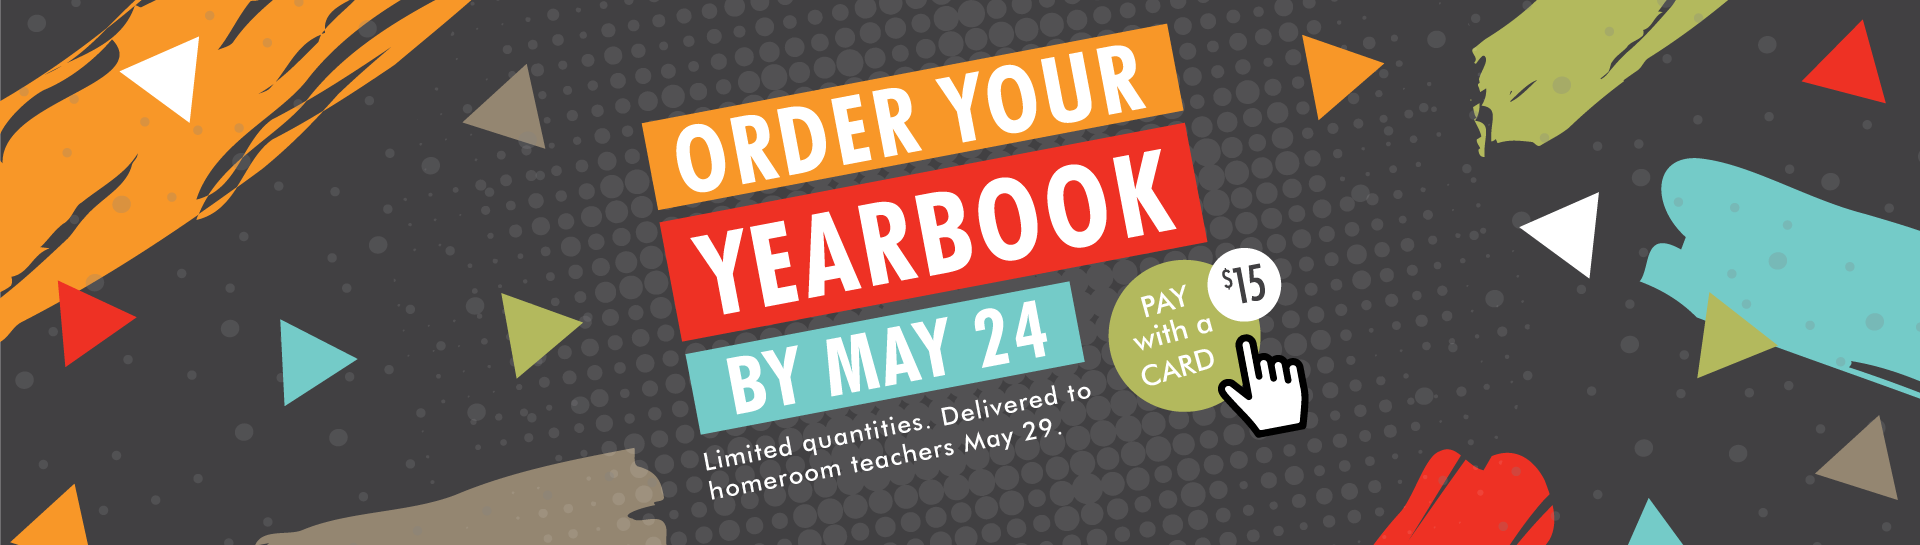 Order your yearbook by May 24